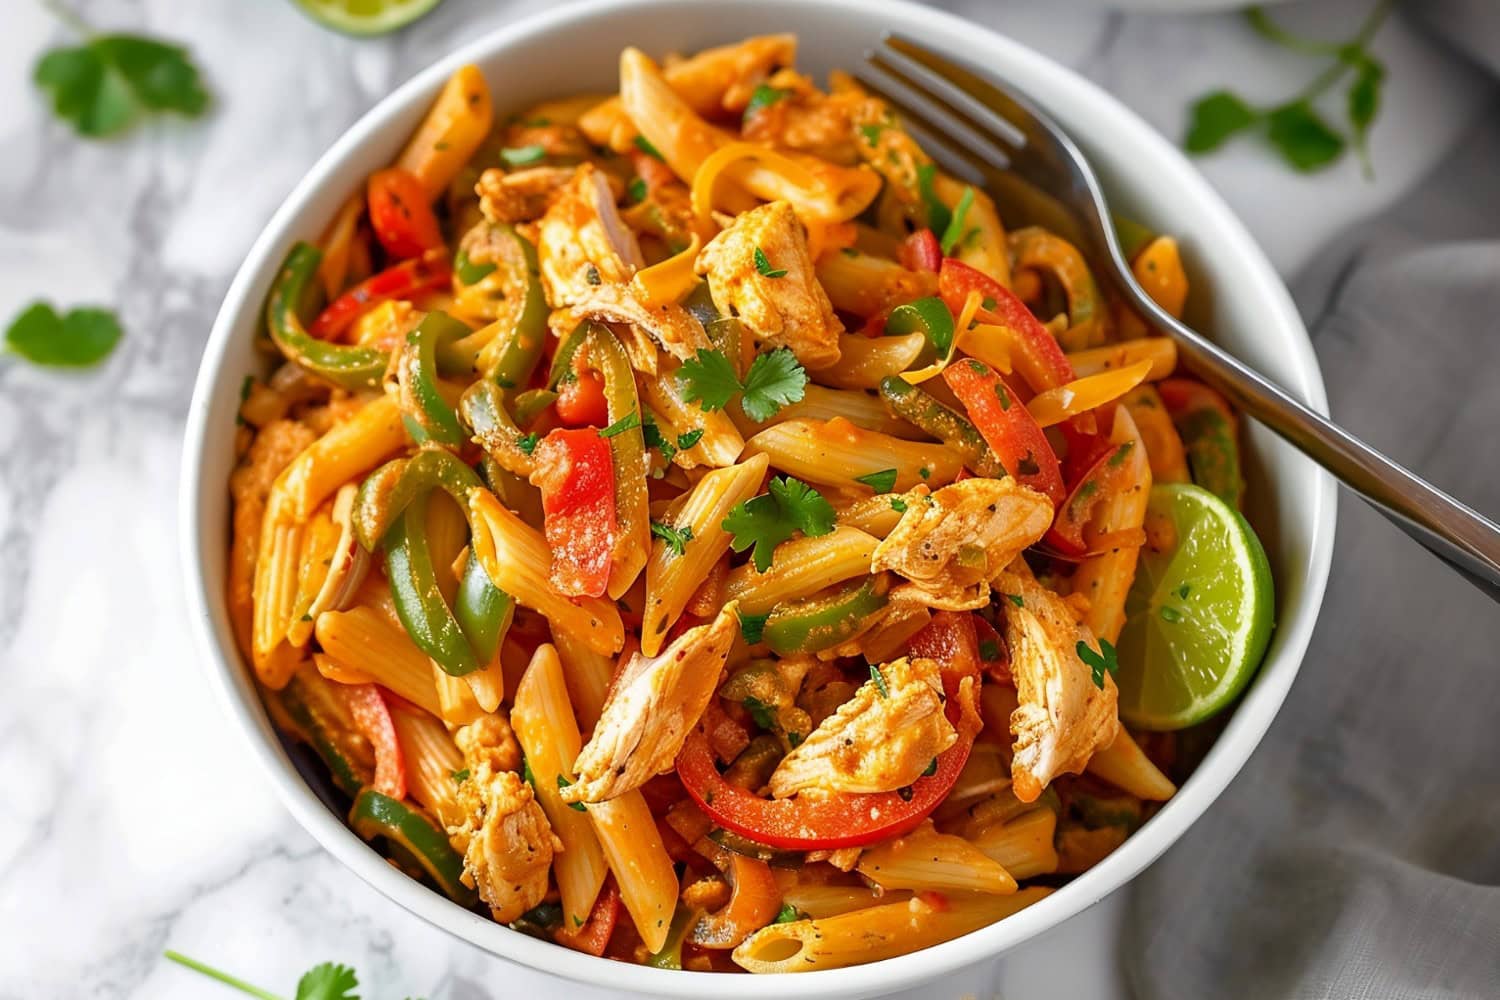 Easy one-pot chicken fajita pasta with bell peppers, cilantro and lime